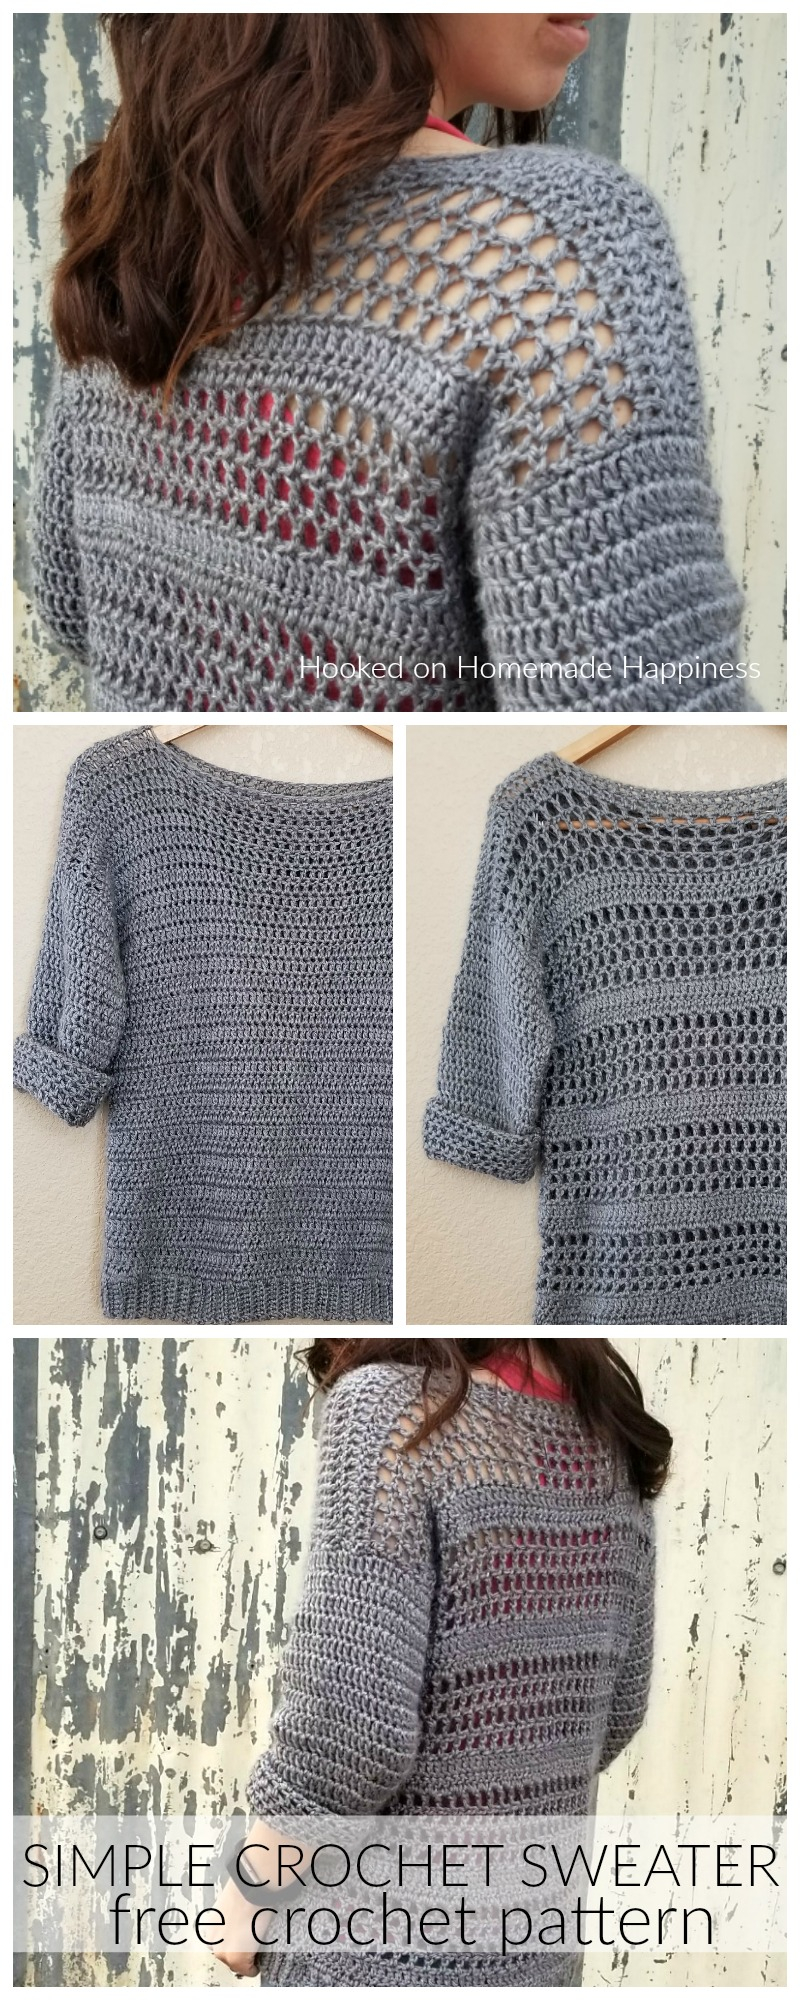 Easy Free Crochet Sweater Patterns Simple Crochet Sweater Pattern Hooked On Homemade Happiness